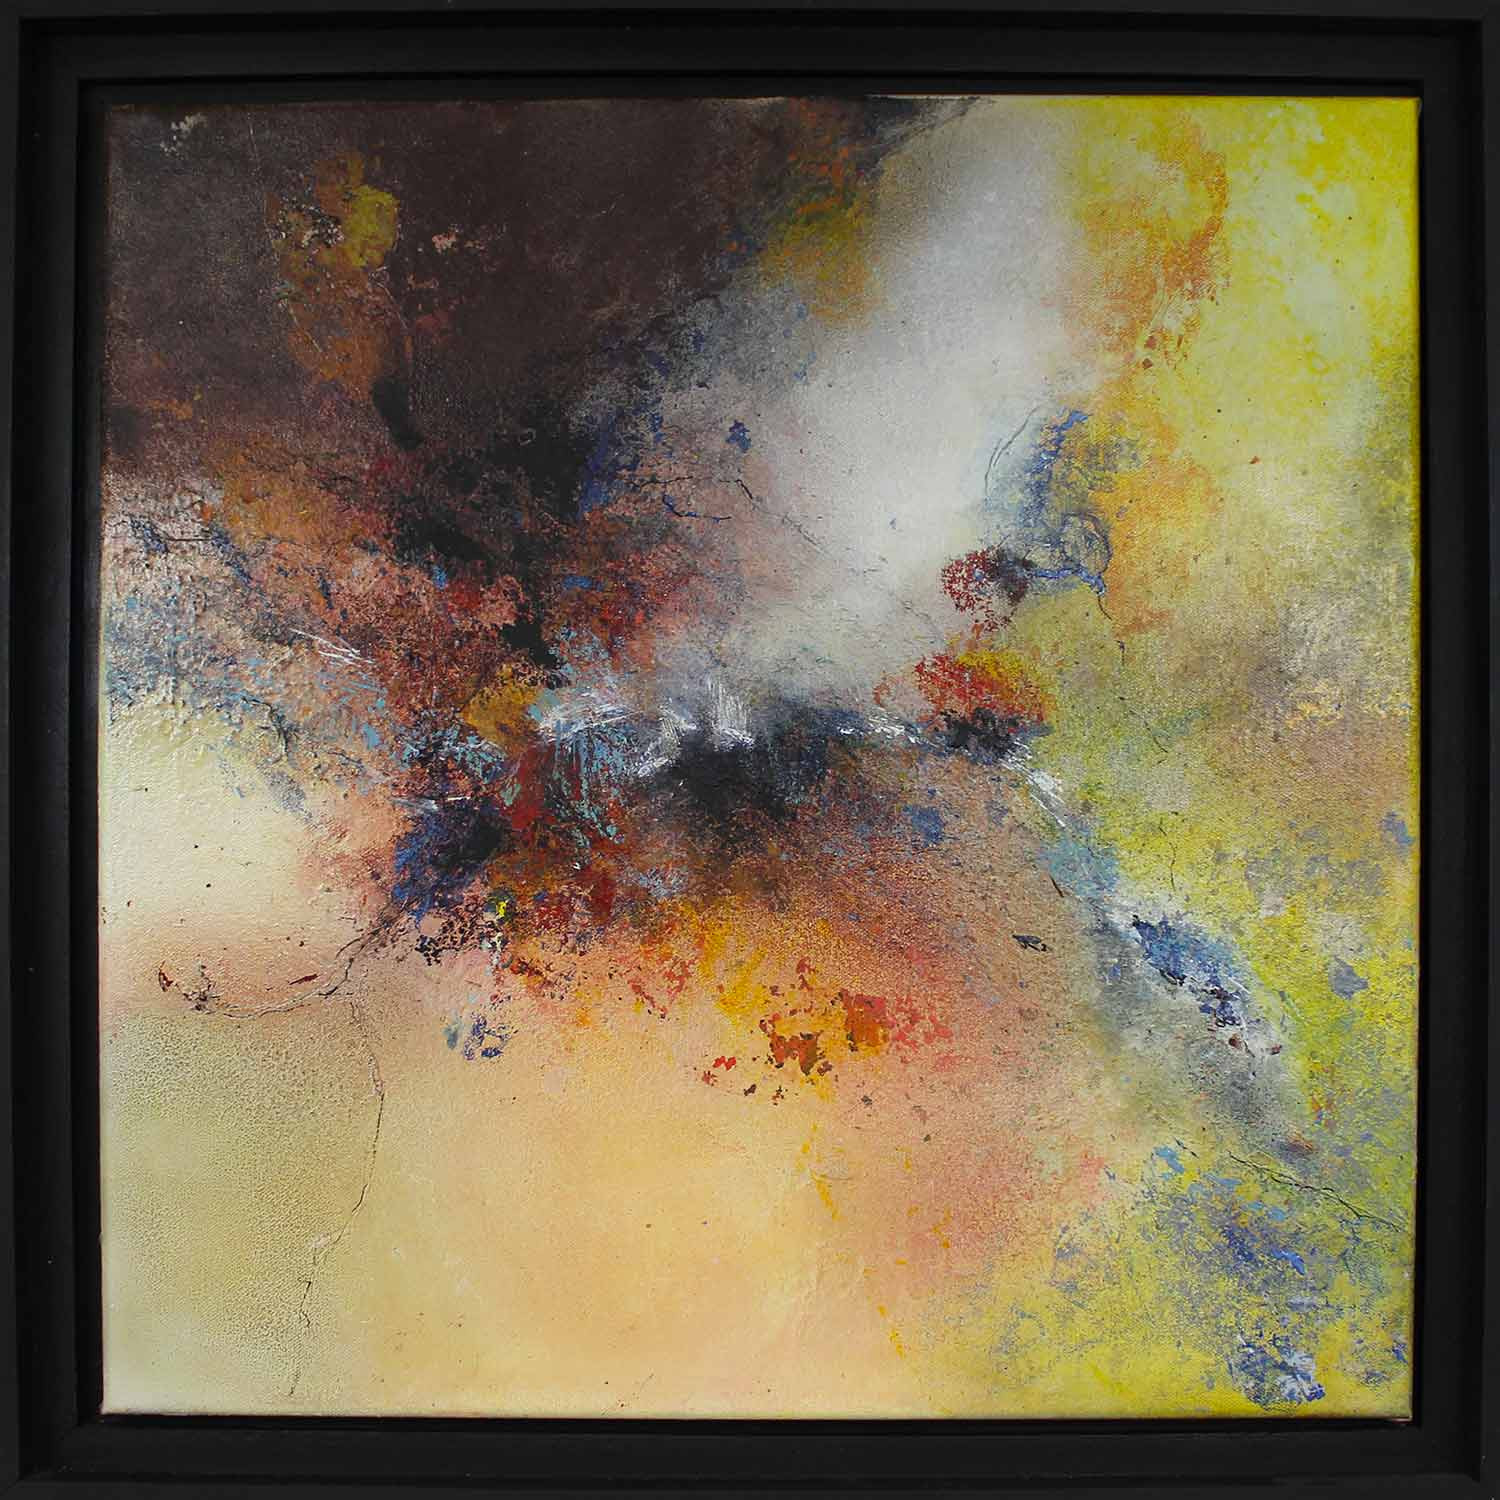 Contemporary Art - Mixed media on canvas - Abstraction 2 - Gil Hanrion